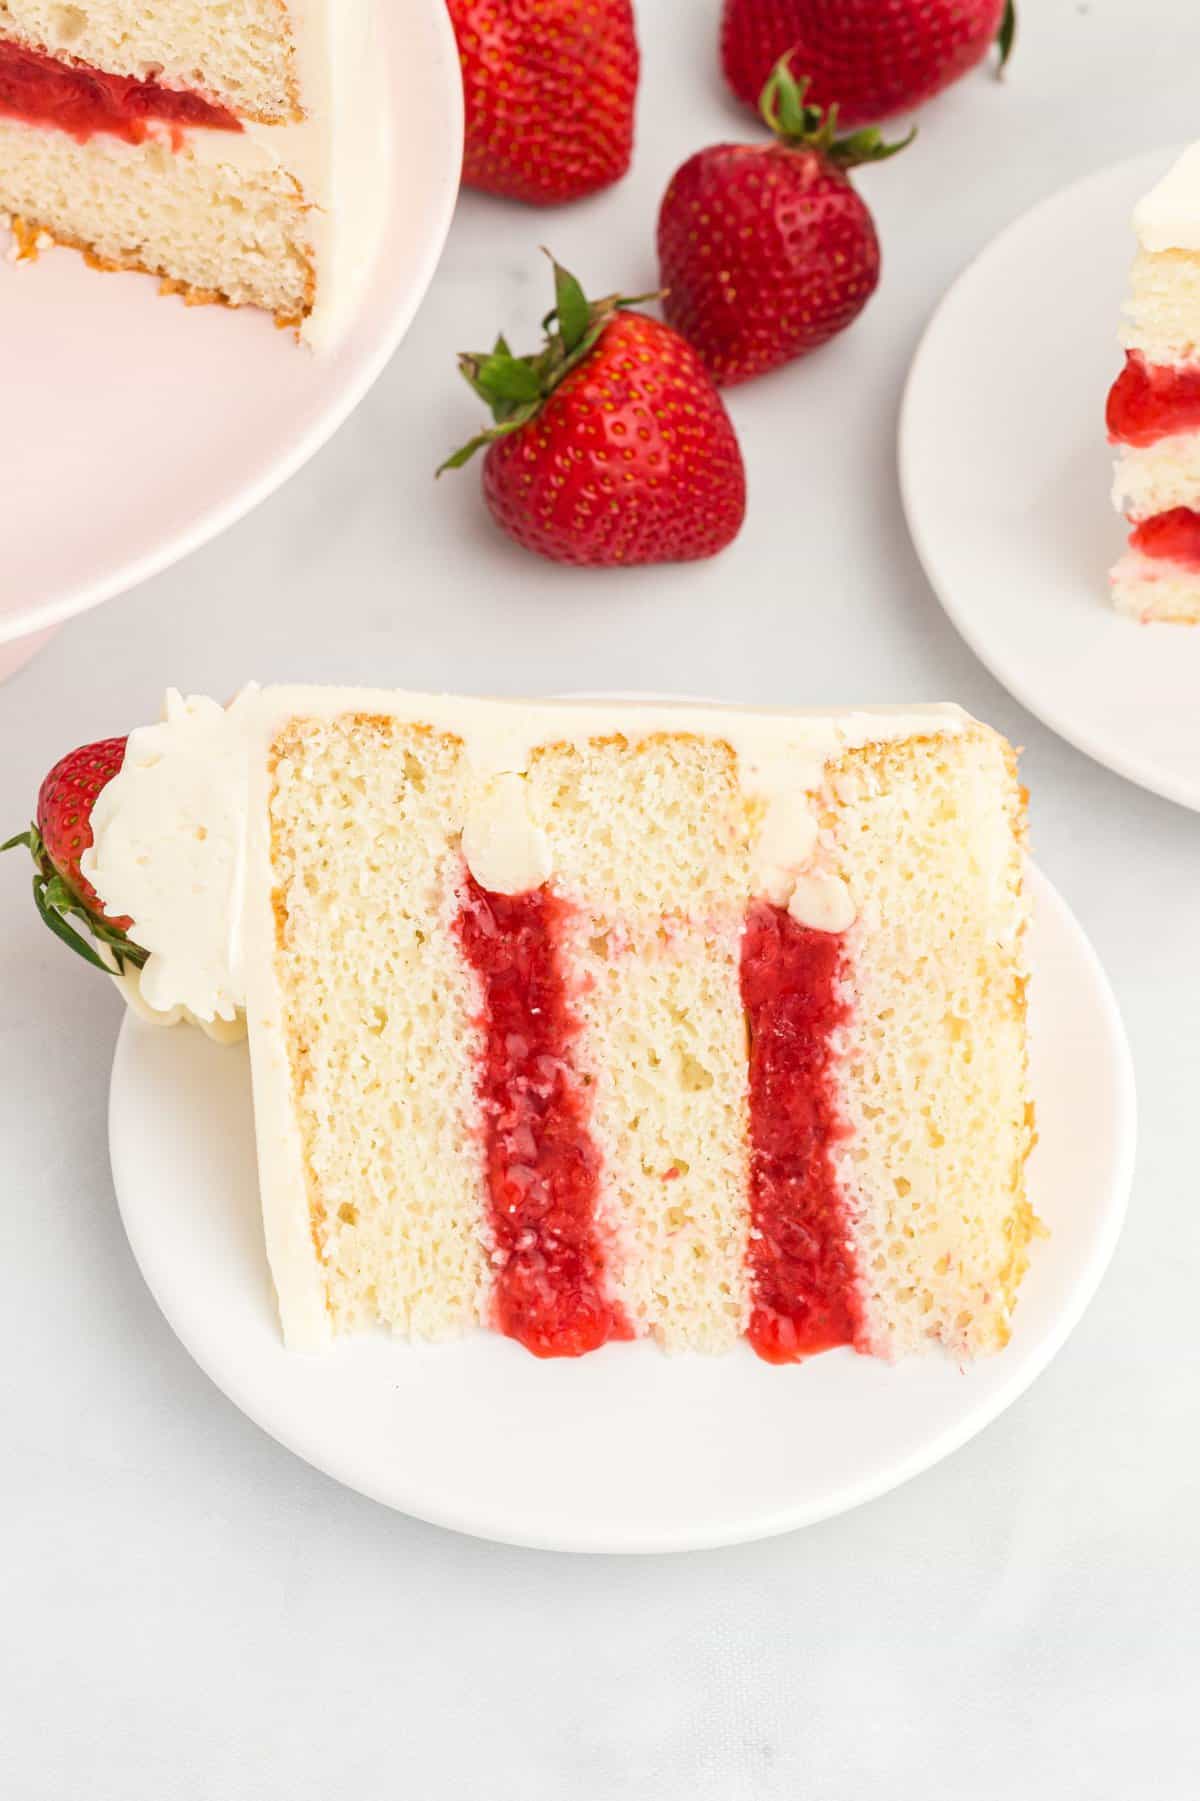 Slice of cake on a white plate to shot the strawberry filling.